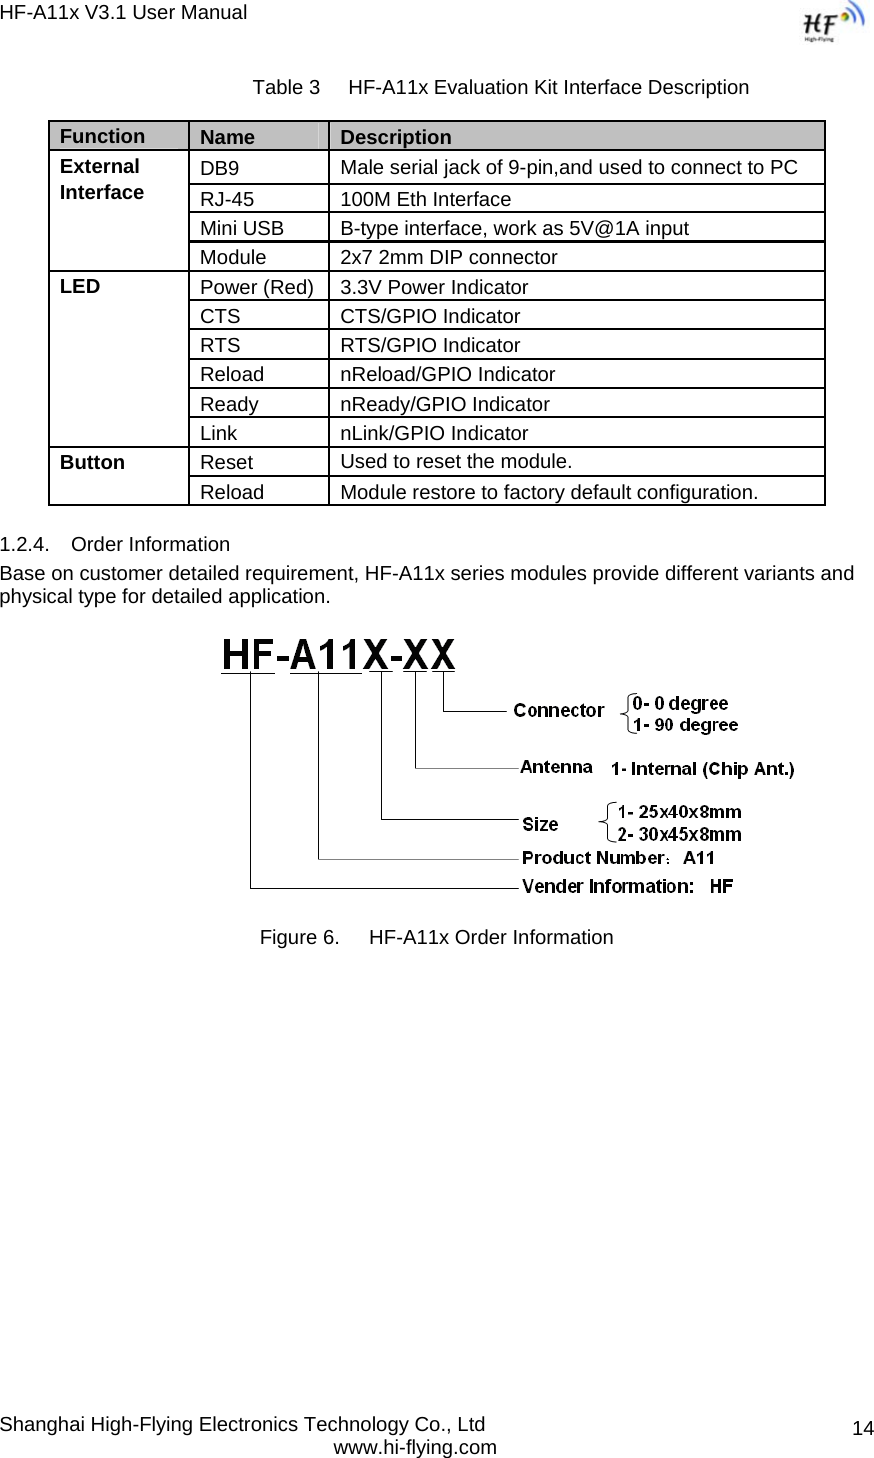 HF-A11x V3.1 User Manual Shanghai High-Flying Electronics Technology Co., Ltd www.hi-flying.com  14Table 3     HF-A11x Evaluation Kit Interface Description 1.2.4.  Order Information  Base on customer detailed requirement, HF-A11x series modules provide different variants and physical type for detailed application.   Figure 6.  HF-A11x Order Information Function  Name  Description DB9  Male serial jack of 9-pin,and used to connect to PC RJ-45 100M Eth Interface Mini USB  B-type interface, work as 5V@1A input External Interface Module  2x7 2mm DIP connector Power (Red)  3.3V Power Indicator CTS   CTS/GPIO Indicator RTS RTS/GPIO Indicator Reload nReload/GPIO Indicator Ready nReady/GPIO Indicator LED Link nLink/GPIO Indicator Reset  Used to reset the module. Button Reload  Module restore to factory default configuration. 